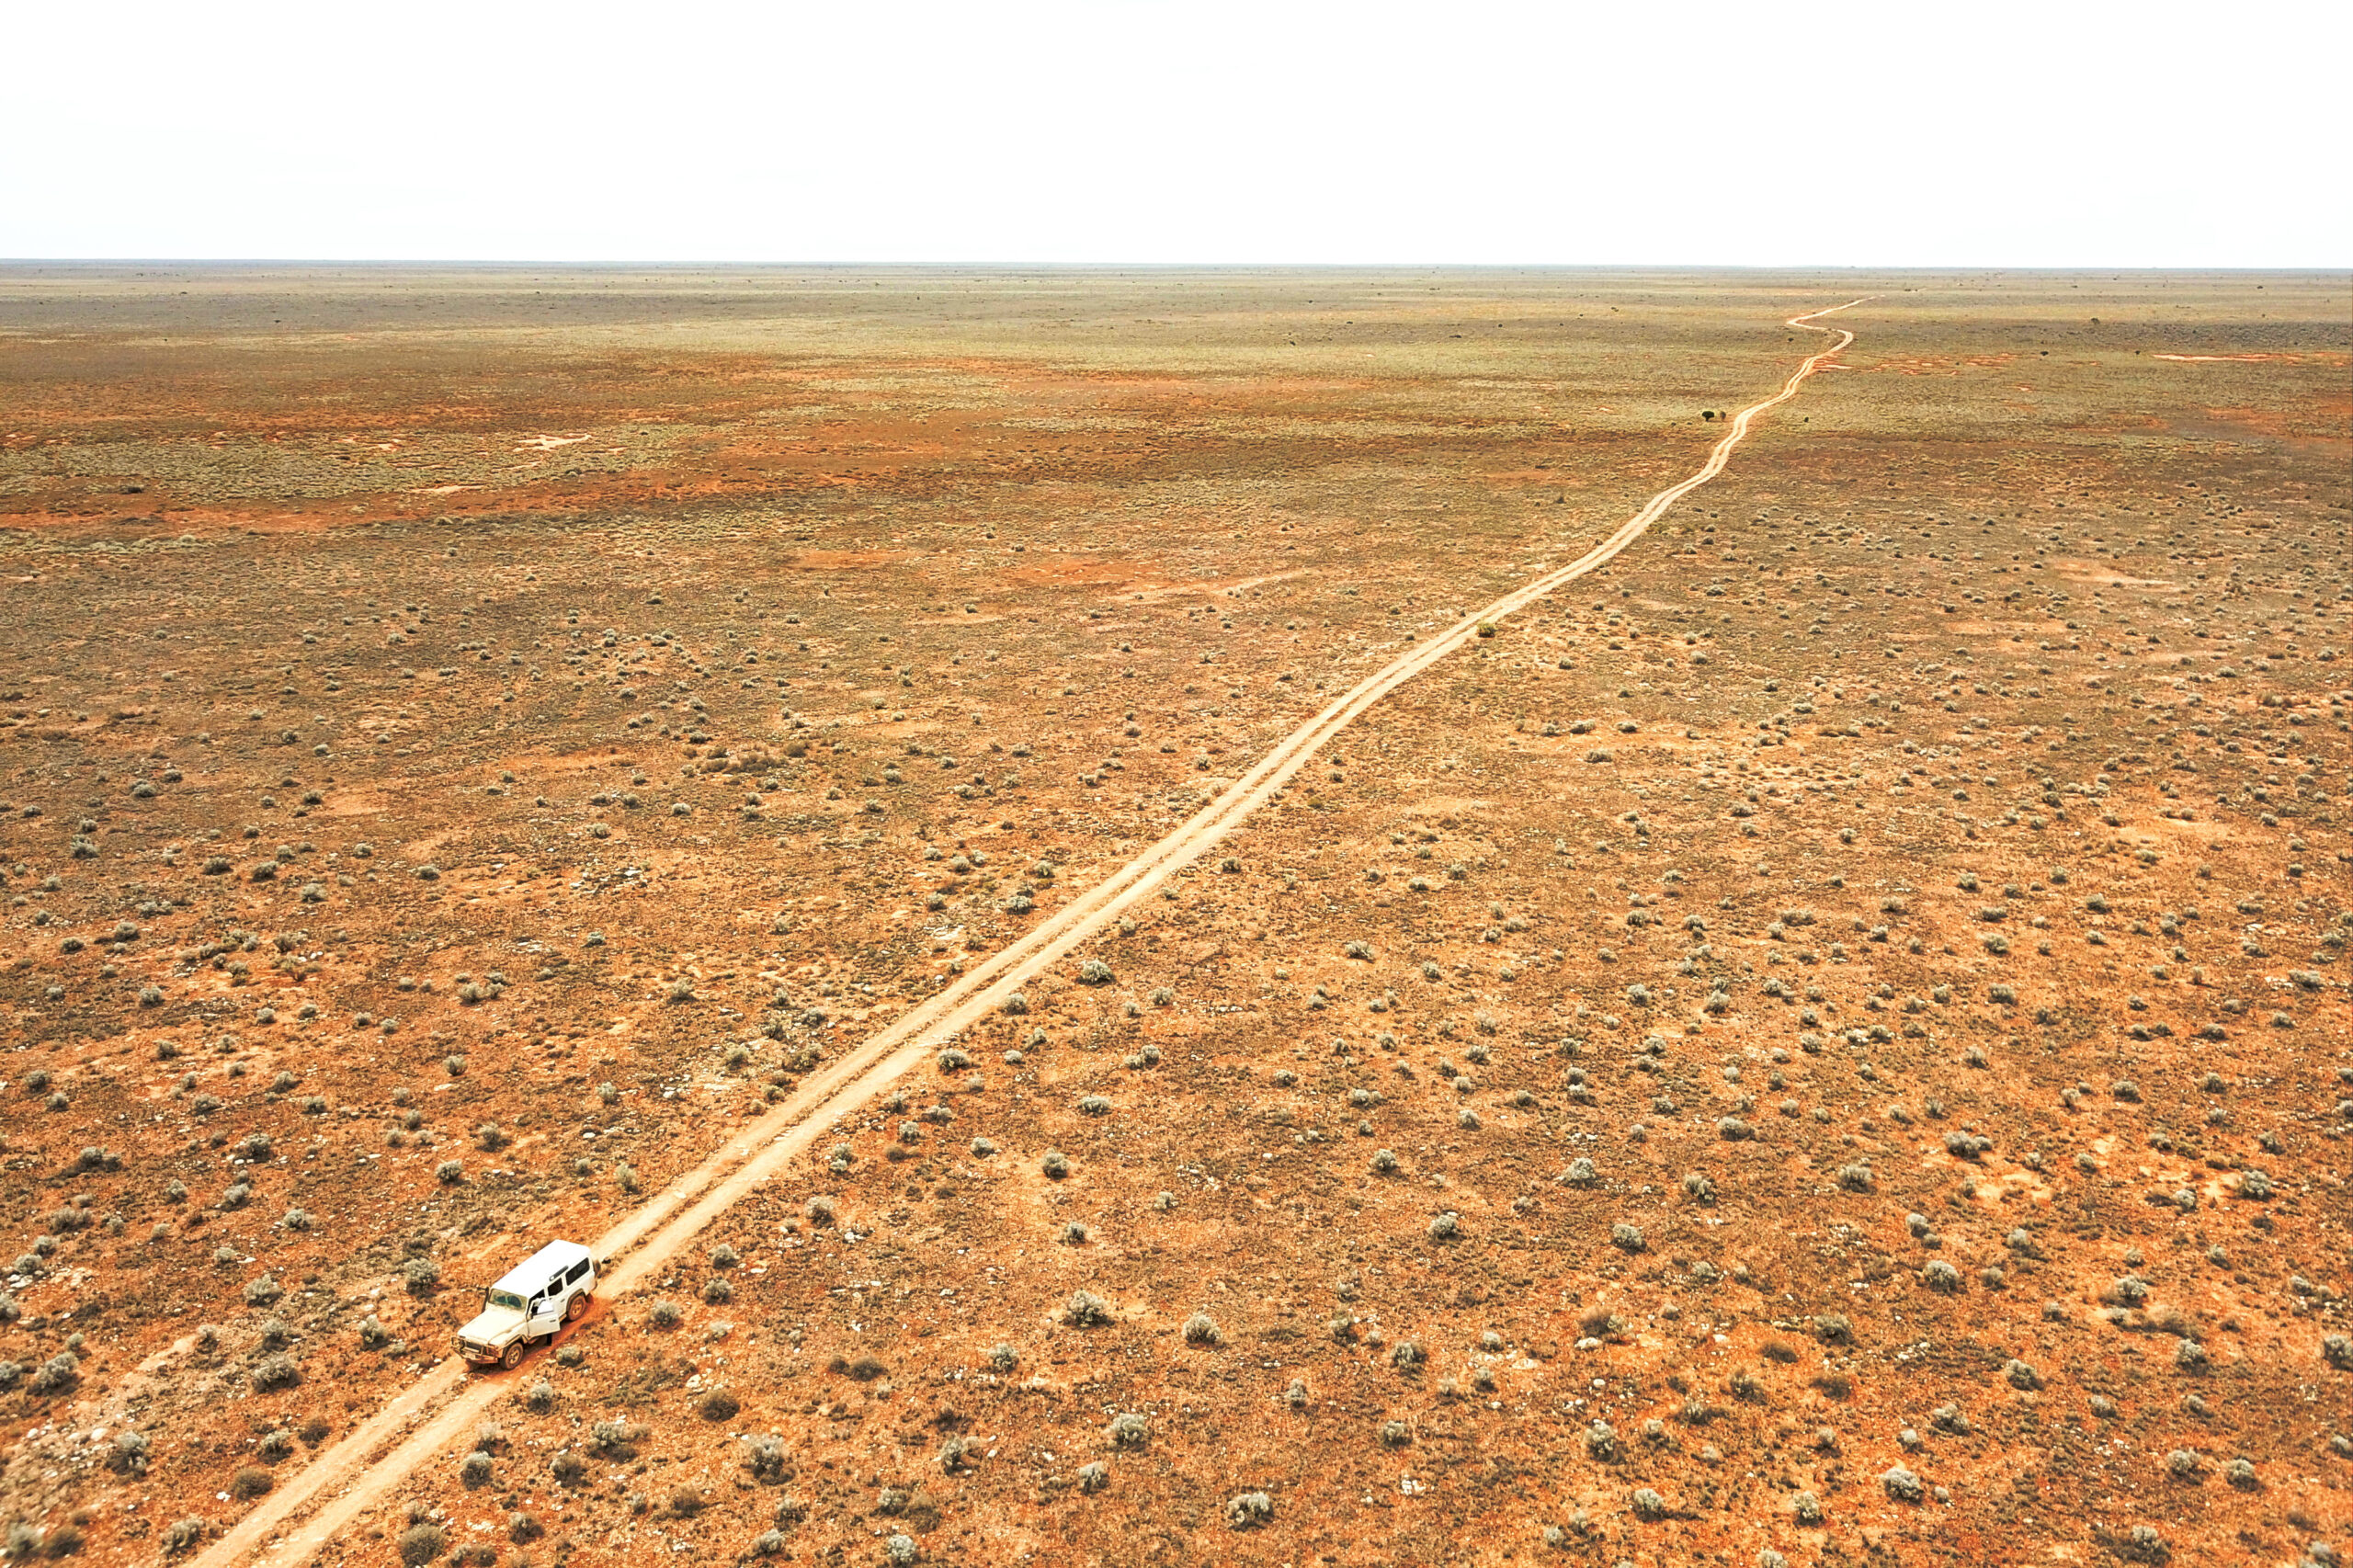 From lush to dust: Nullarbor rocks reveal ancient climate change